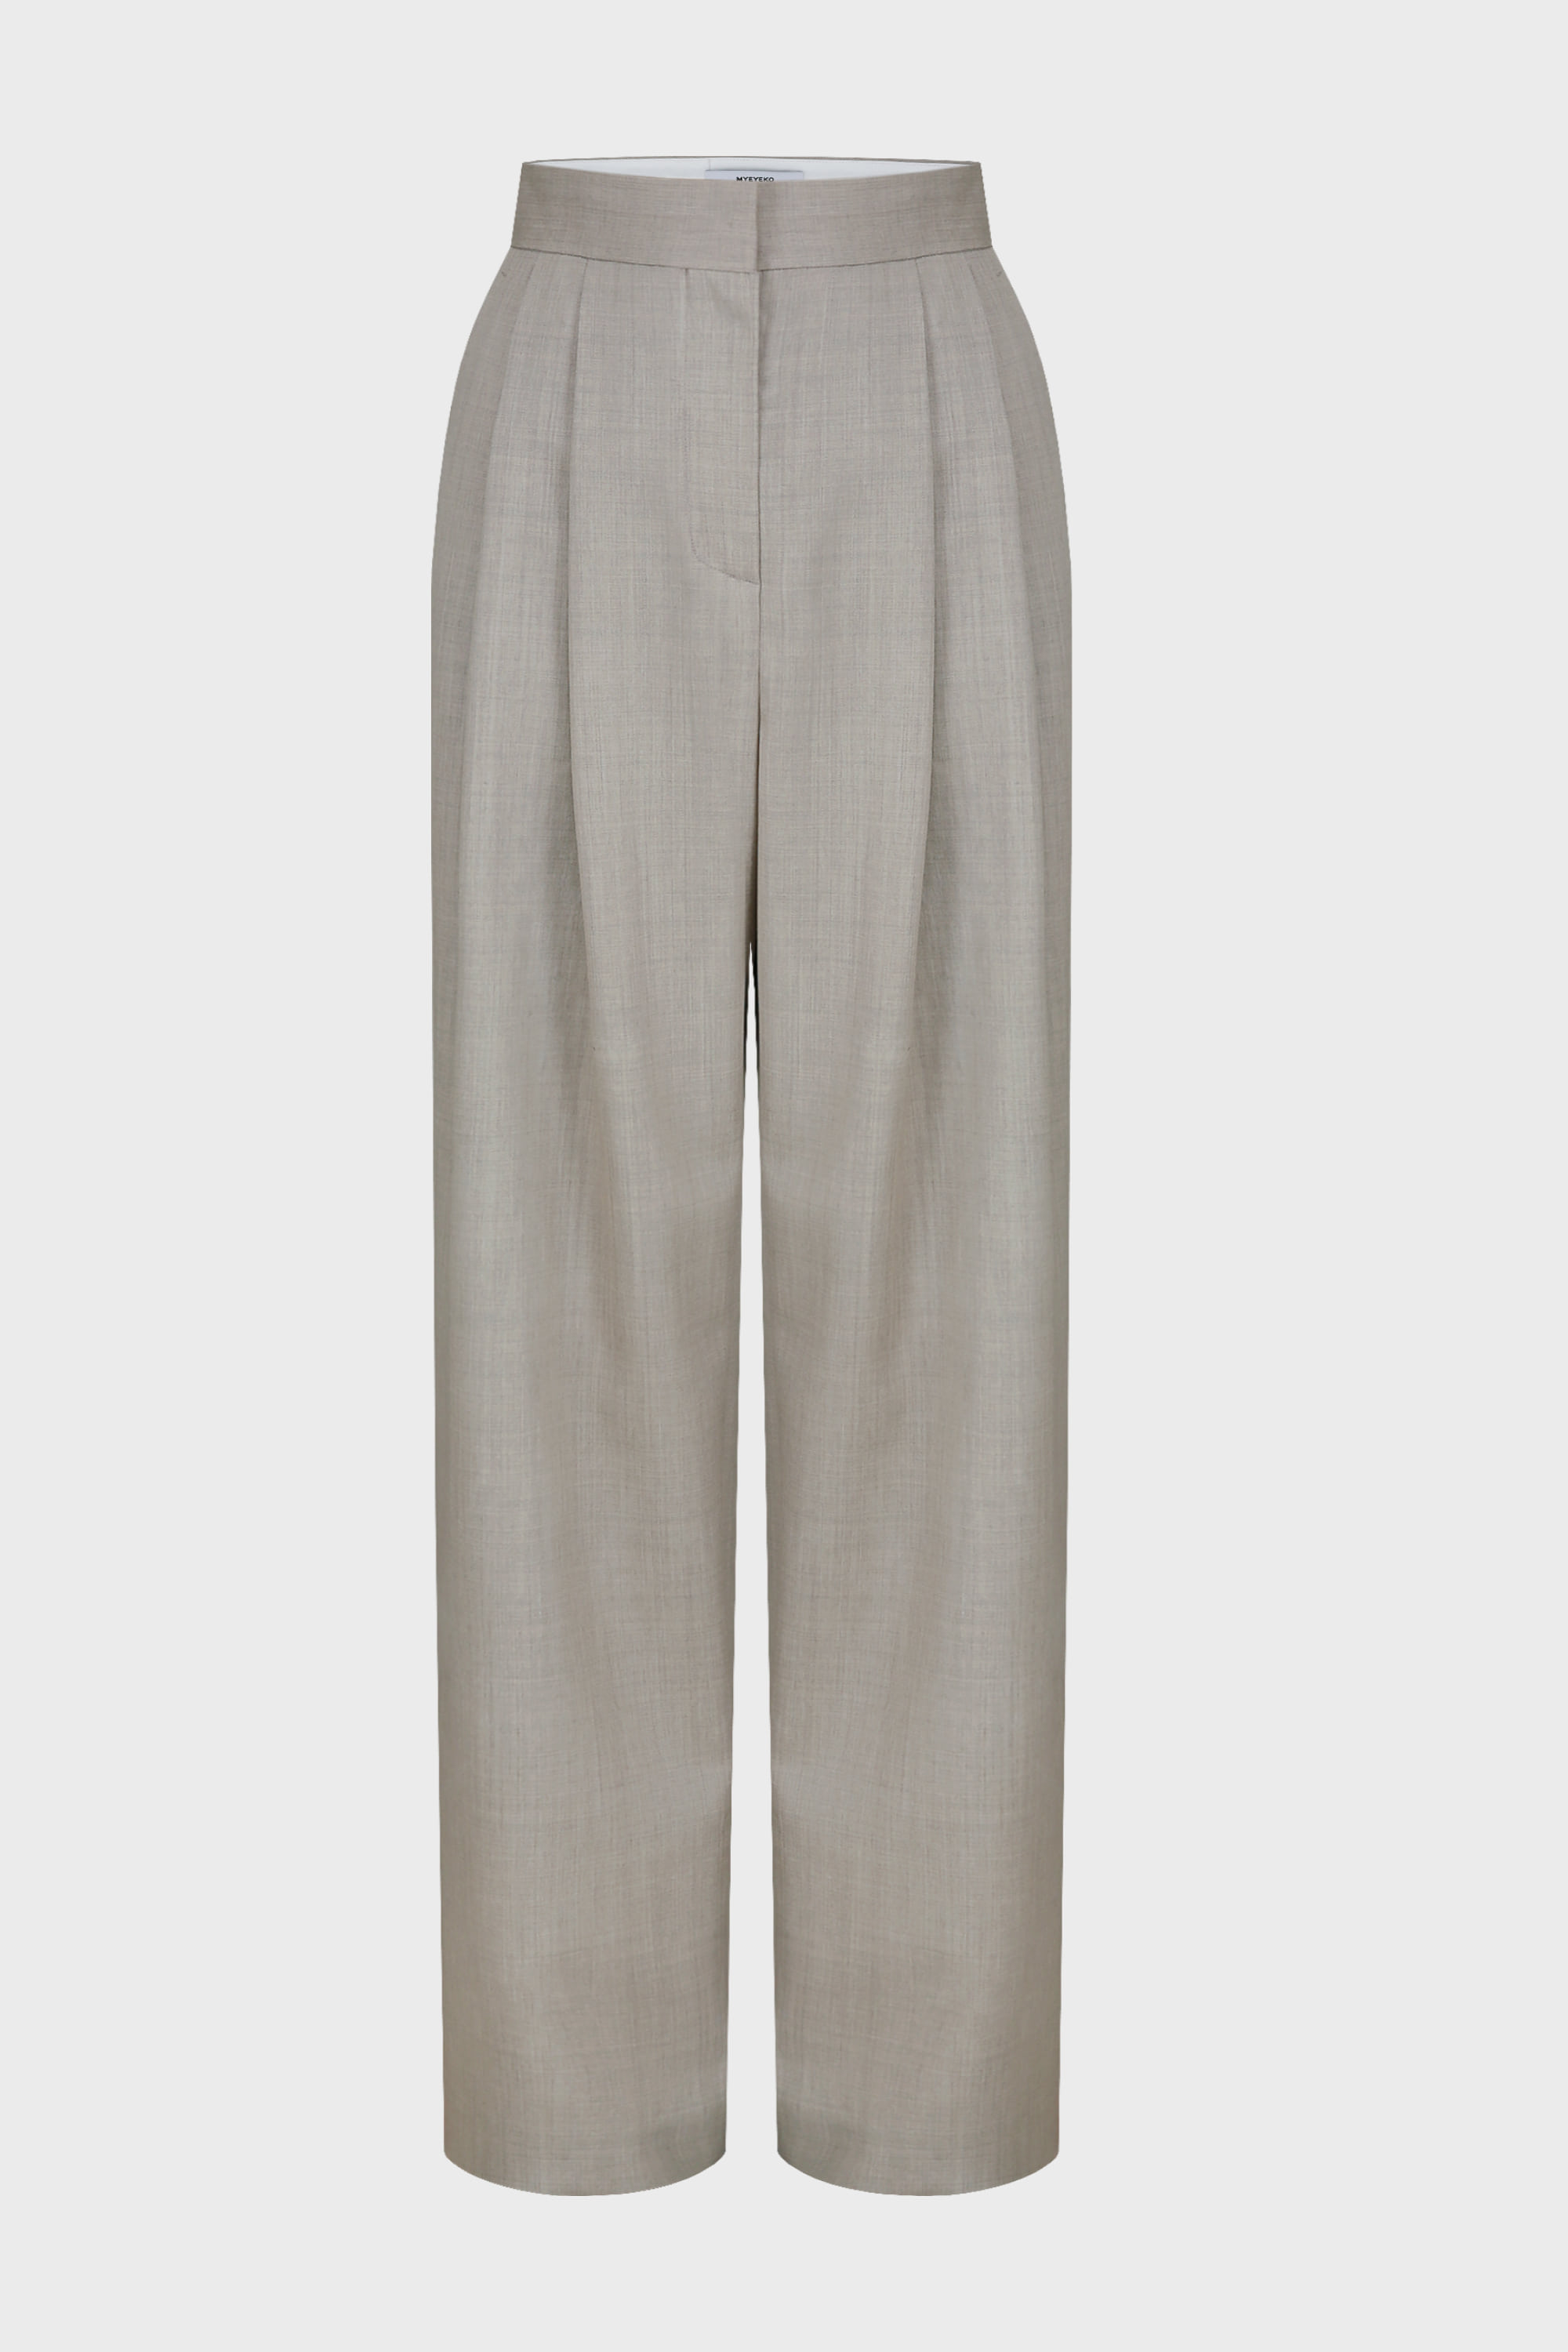 HIGH QUALITY LINE - 22SS WOOL WIDE TROUSER